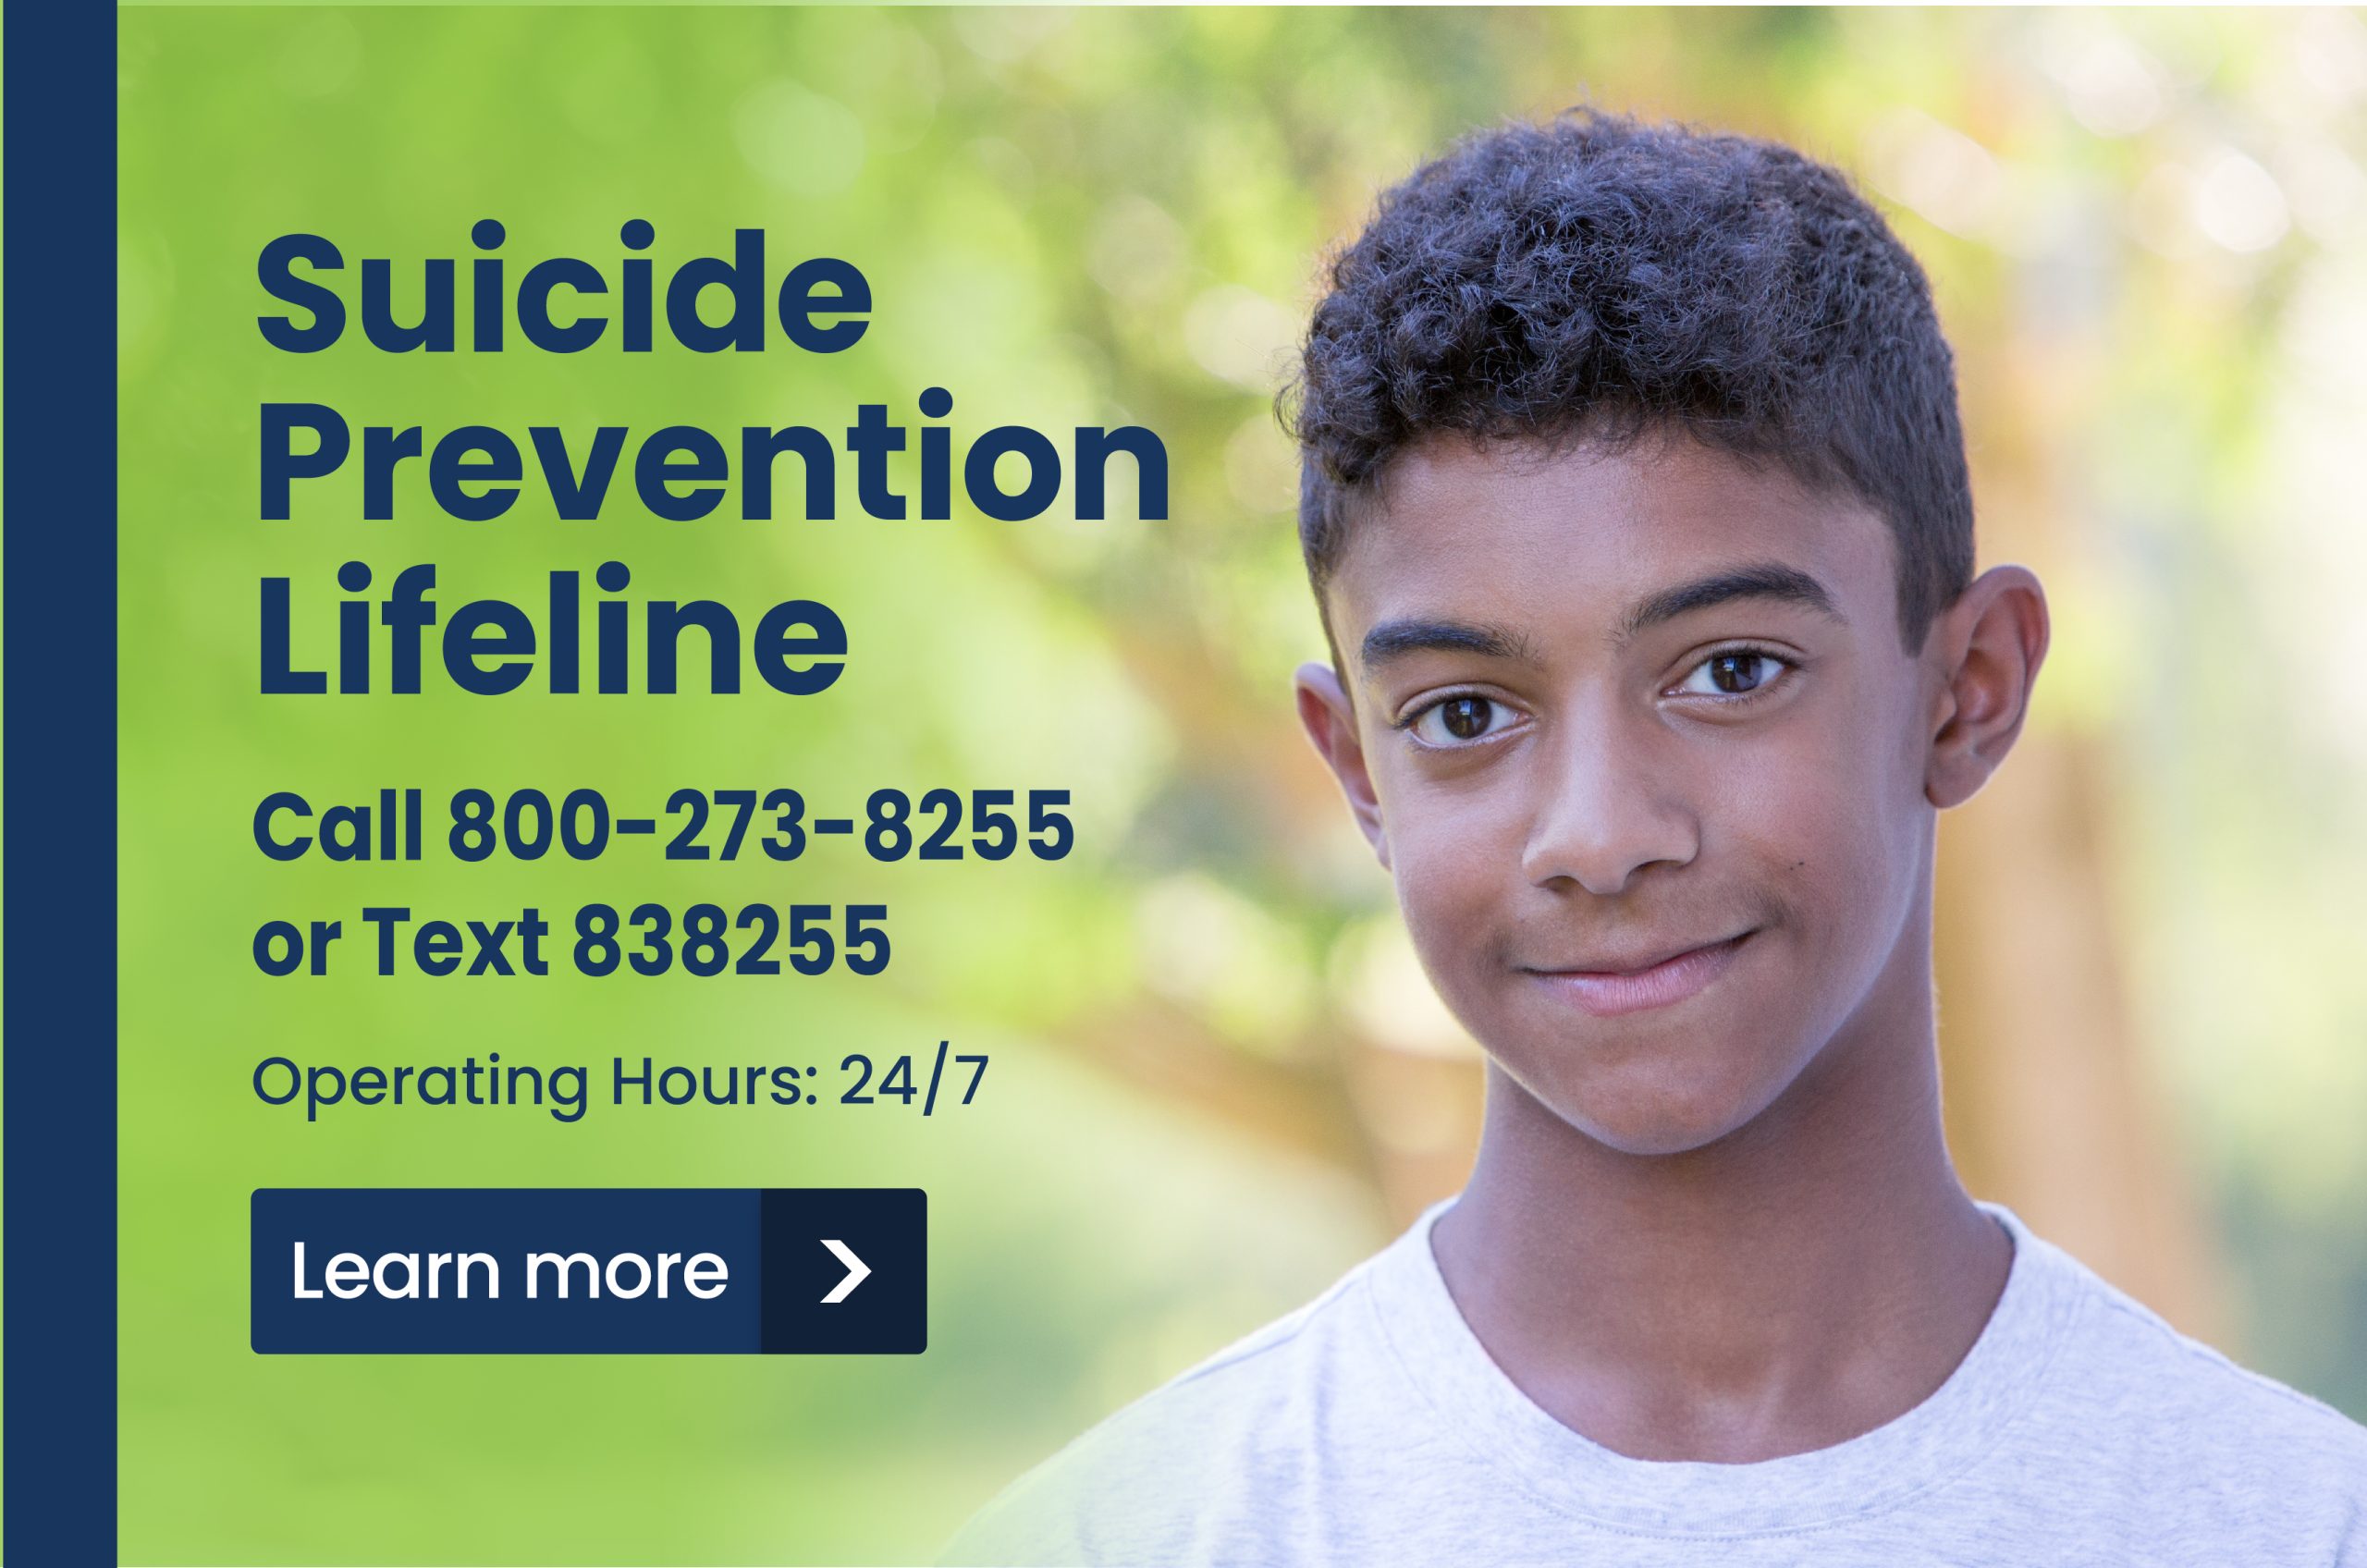 If you’re thinking about suicide, are worried about a friend or loved one, or would like emotional support, the Lifeline network is available 24/7.